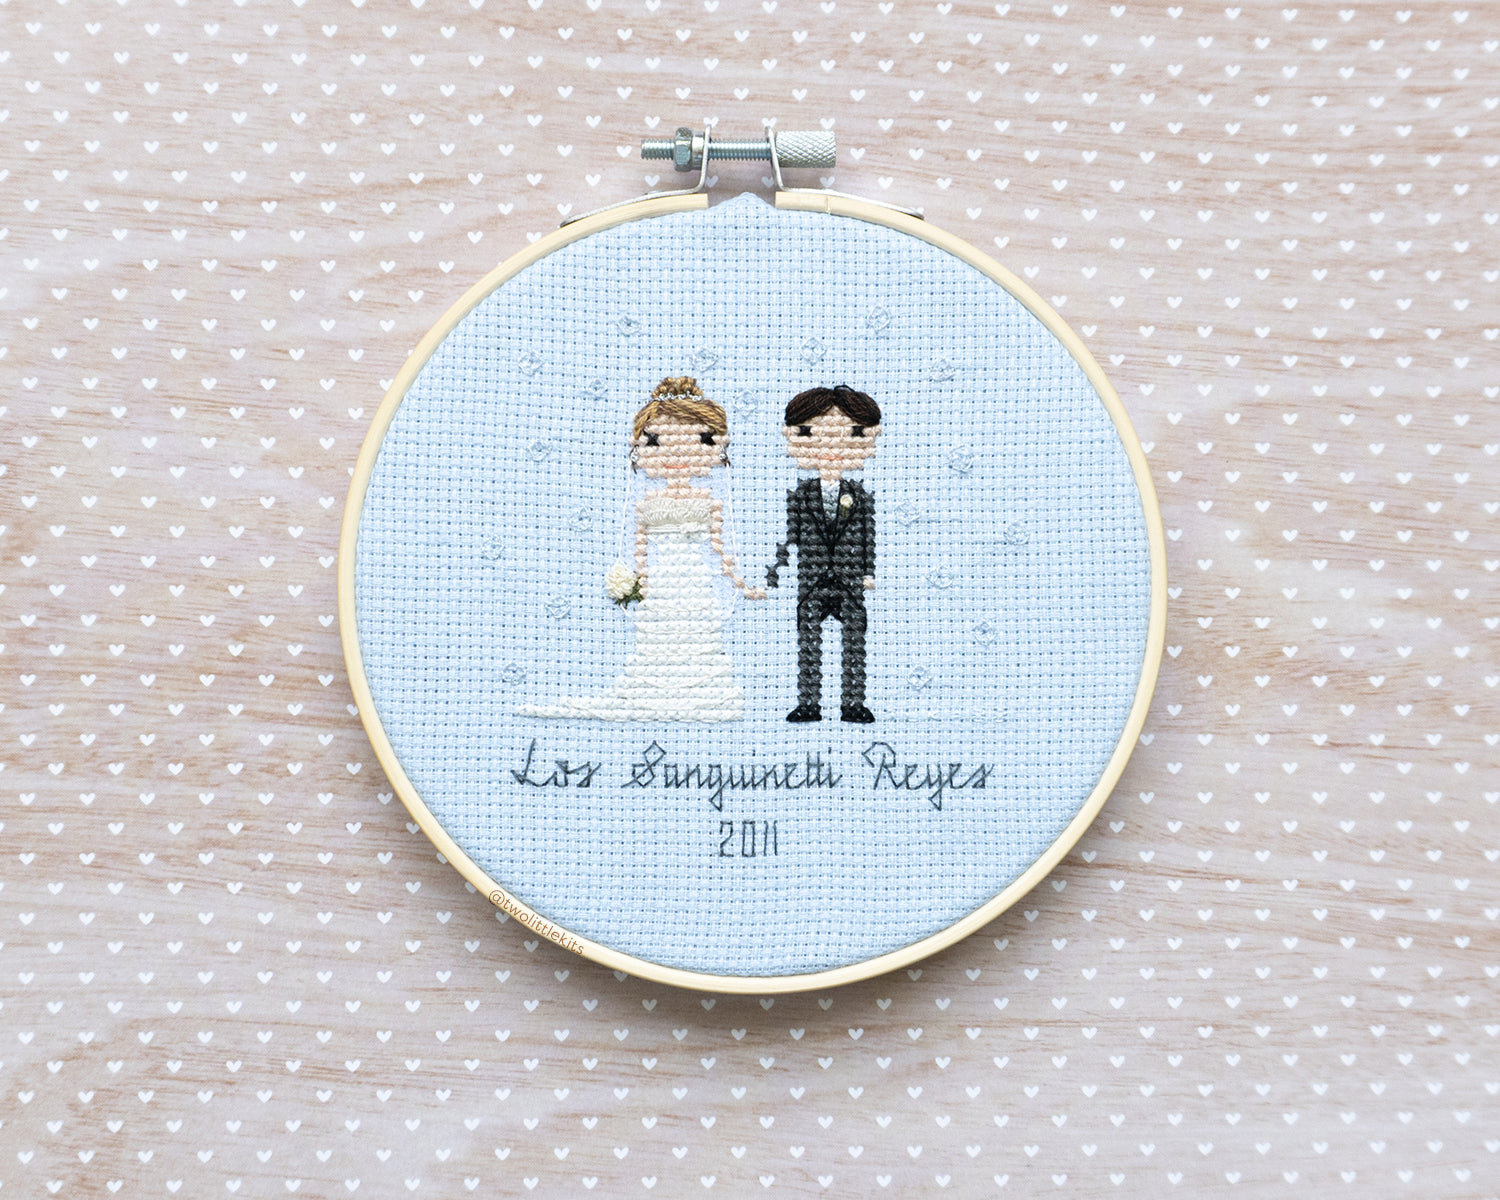 A cross-stitched bride and groom with subtle bubbles hand-stitched around them. It's framed in a wooden embroidery hoop and reads "Los Sanguinetti Reyes"